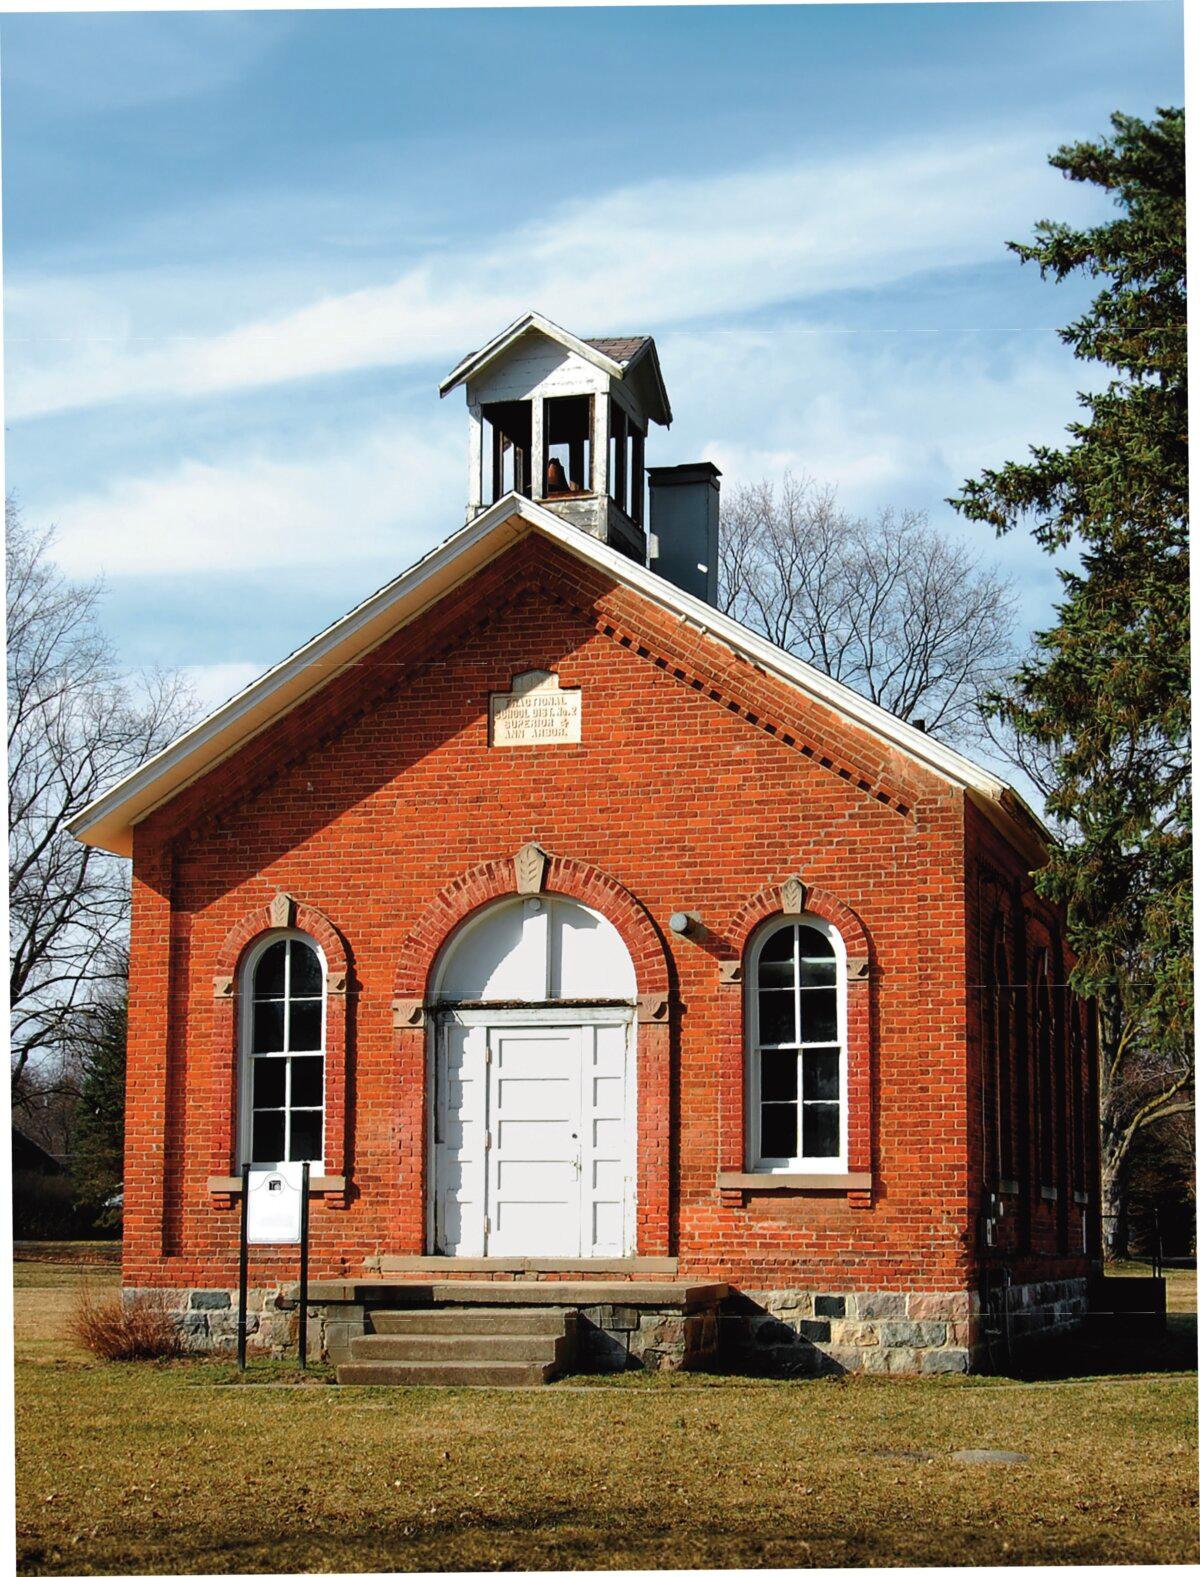 An iconic, red brick schoolhouse in Dixboro, Mich. (Susan Montgomery/Shuttersock)